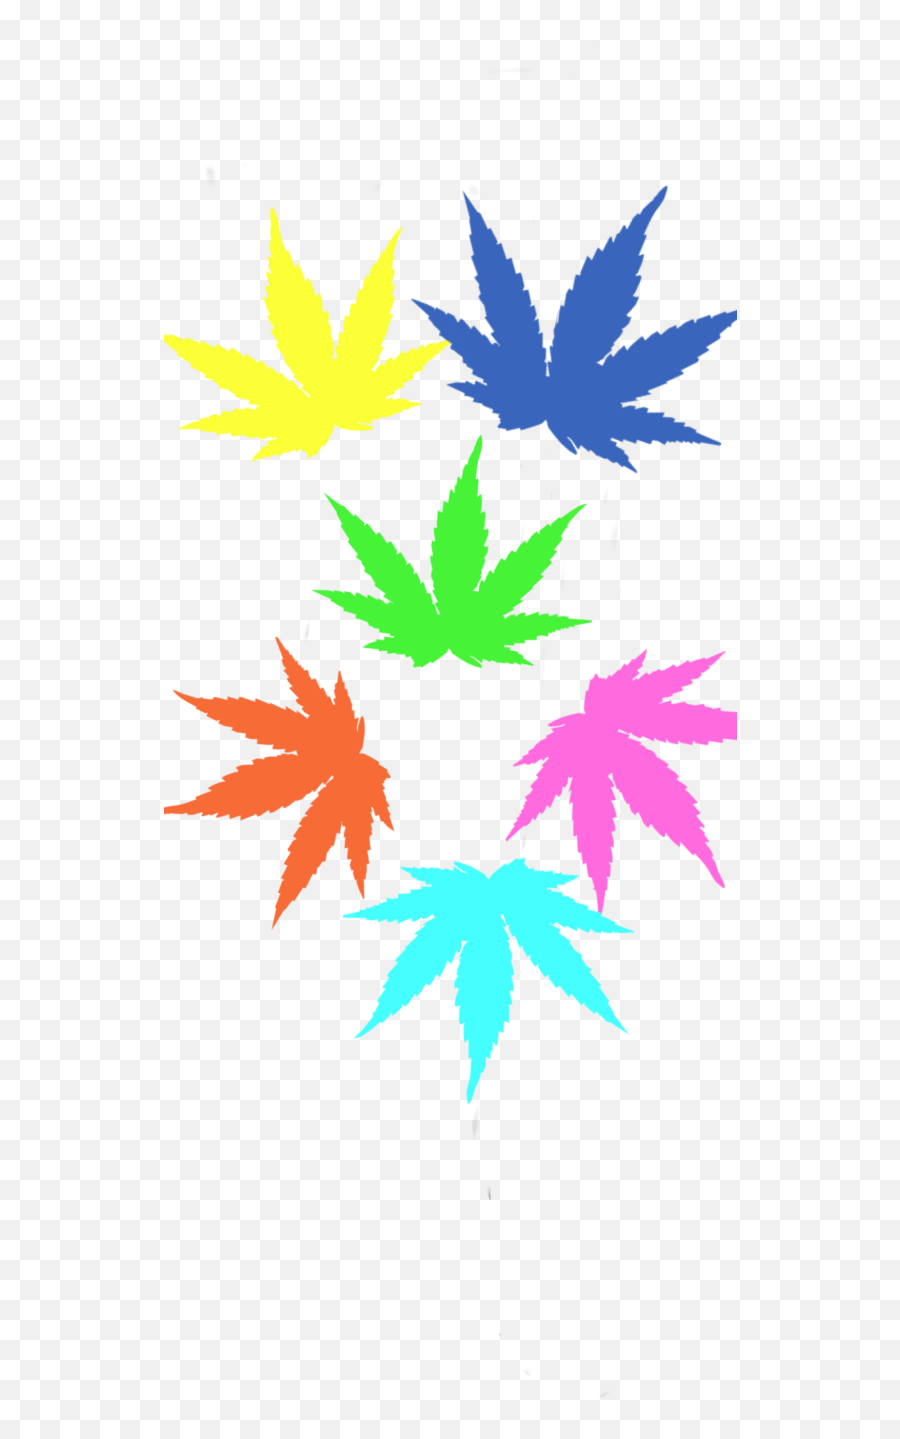 Http - I Imgur Com4ilroi9 Transparent Rainbow Weed Pot Leaf Outline Png,Weed Png